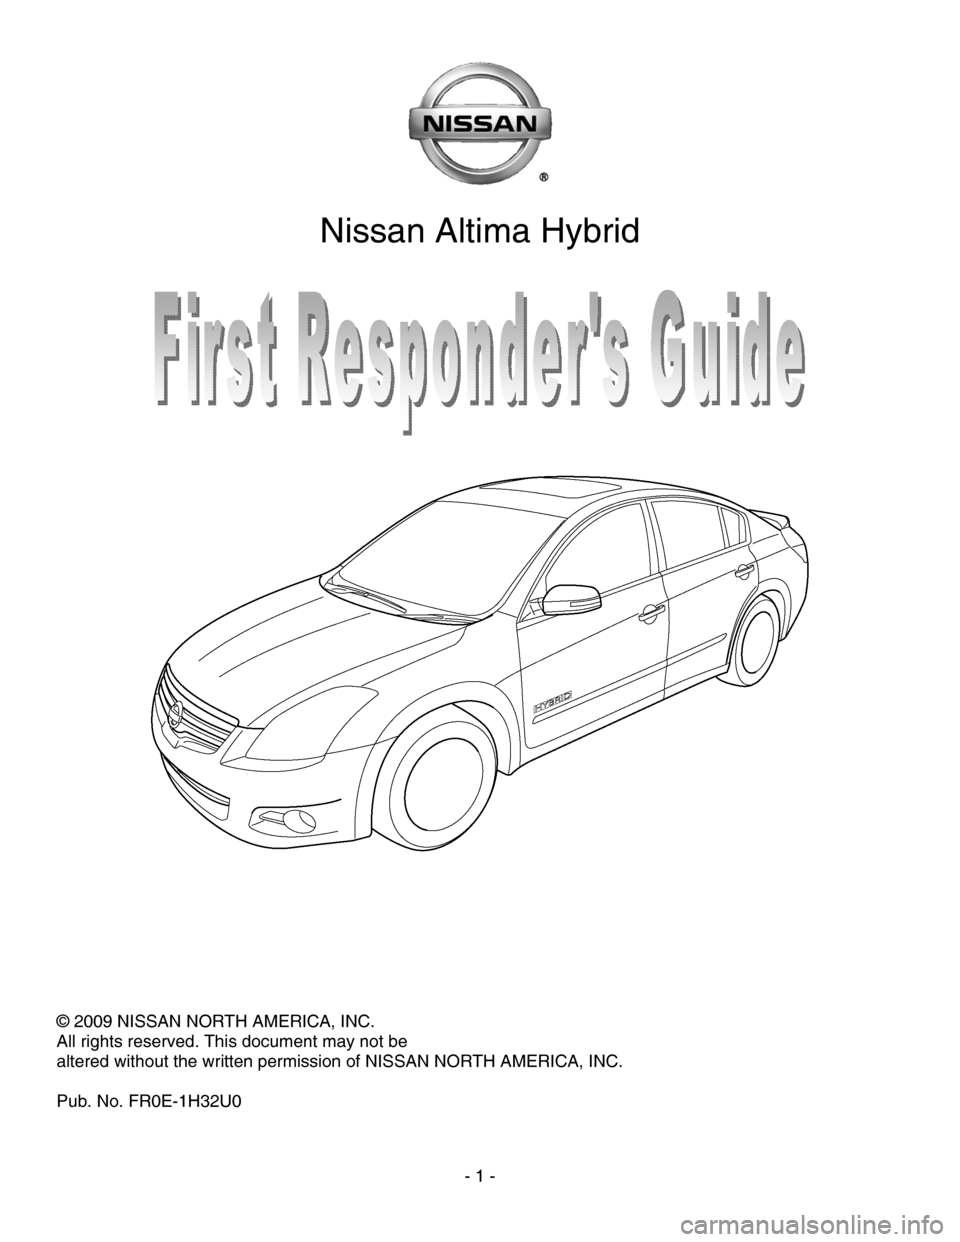 NISSAN ALTIMA HYBRID 2010 L32A / 4.G First Responders Guide  
 
Nissan Altima Hybrid 
 
 
 
 
 
 
 
 
 
© 2009 NISSAN NORTH AMERICA, INC. 
All rights reserved. This document may not be  
altered without the written permission of NISSAN NORTH AMERICA, INC.  
 